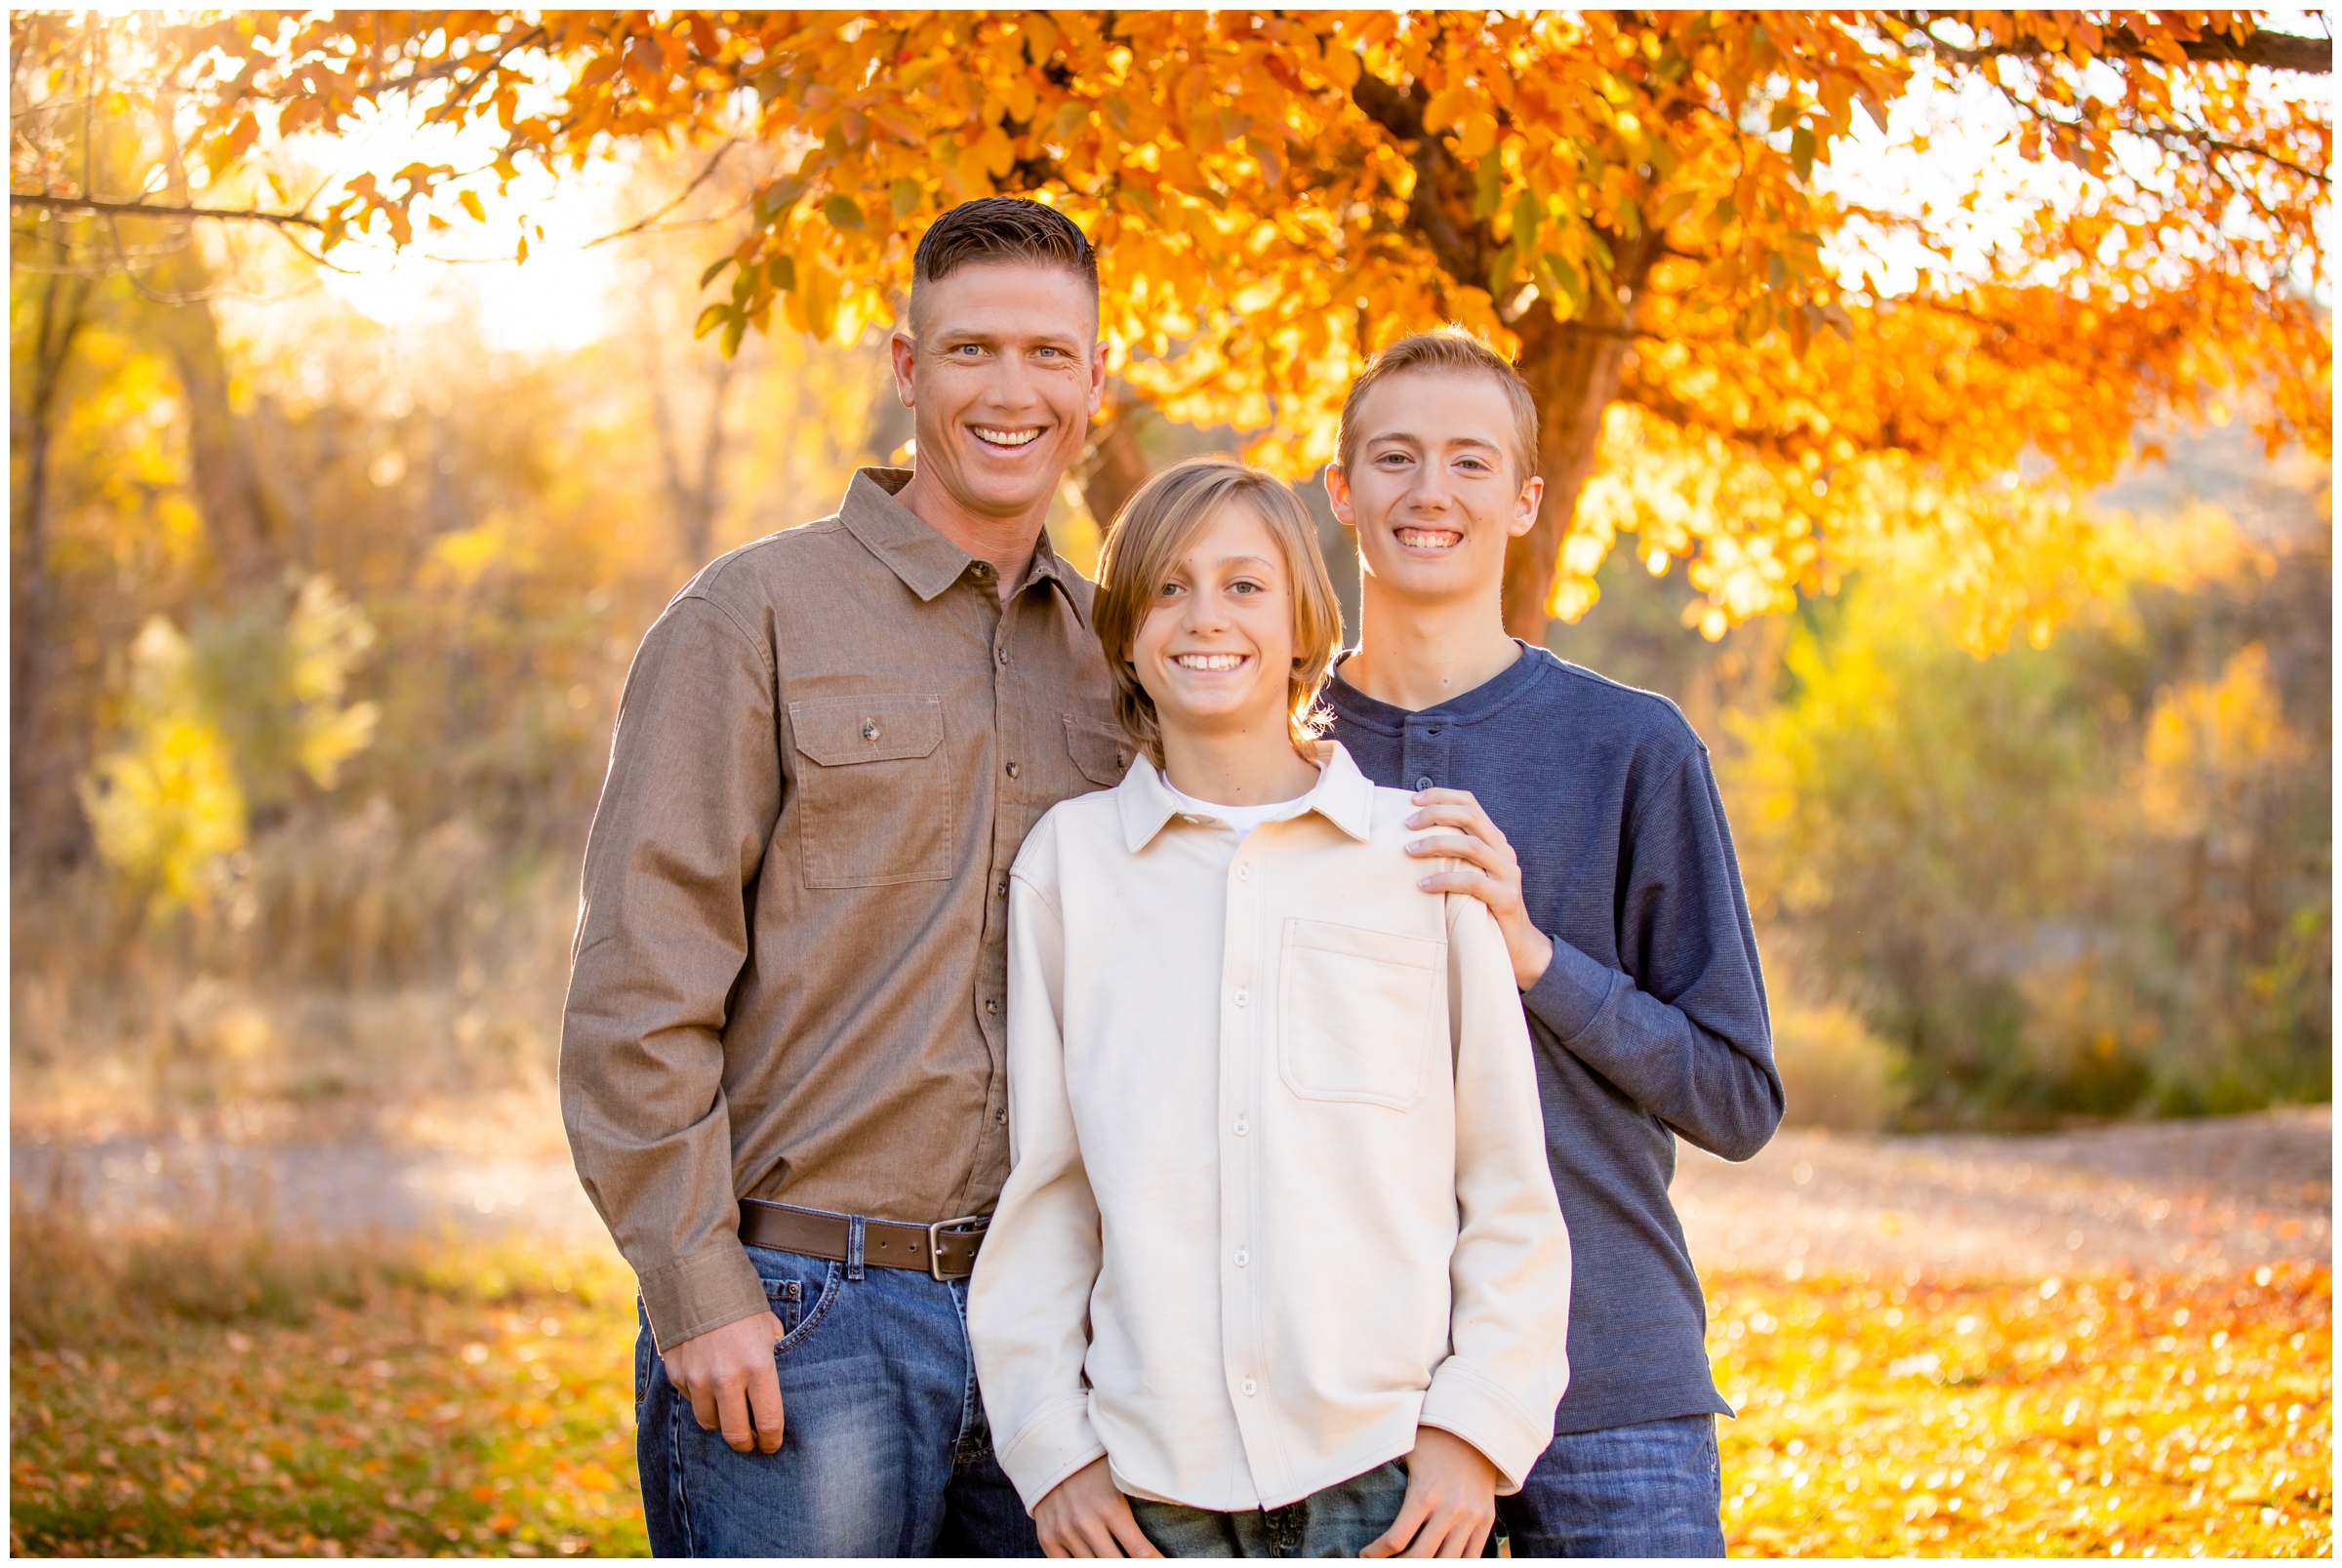 Fall family photos in Lyons at Bohn Park by Colorado portrait photographer Plum Pretty Photography